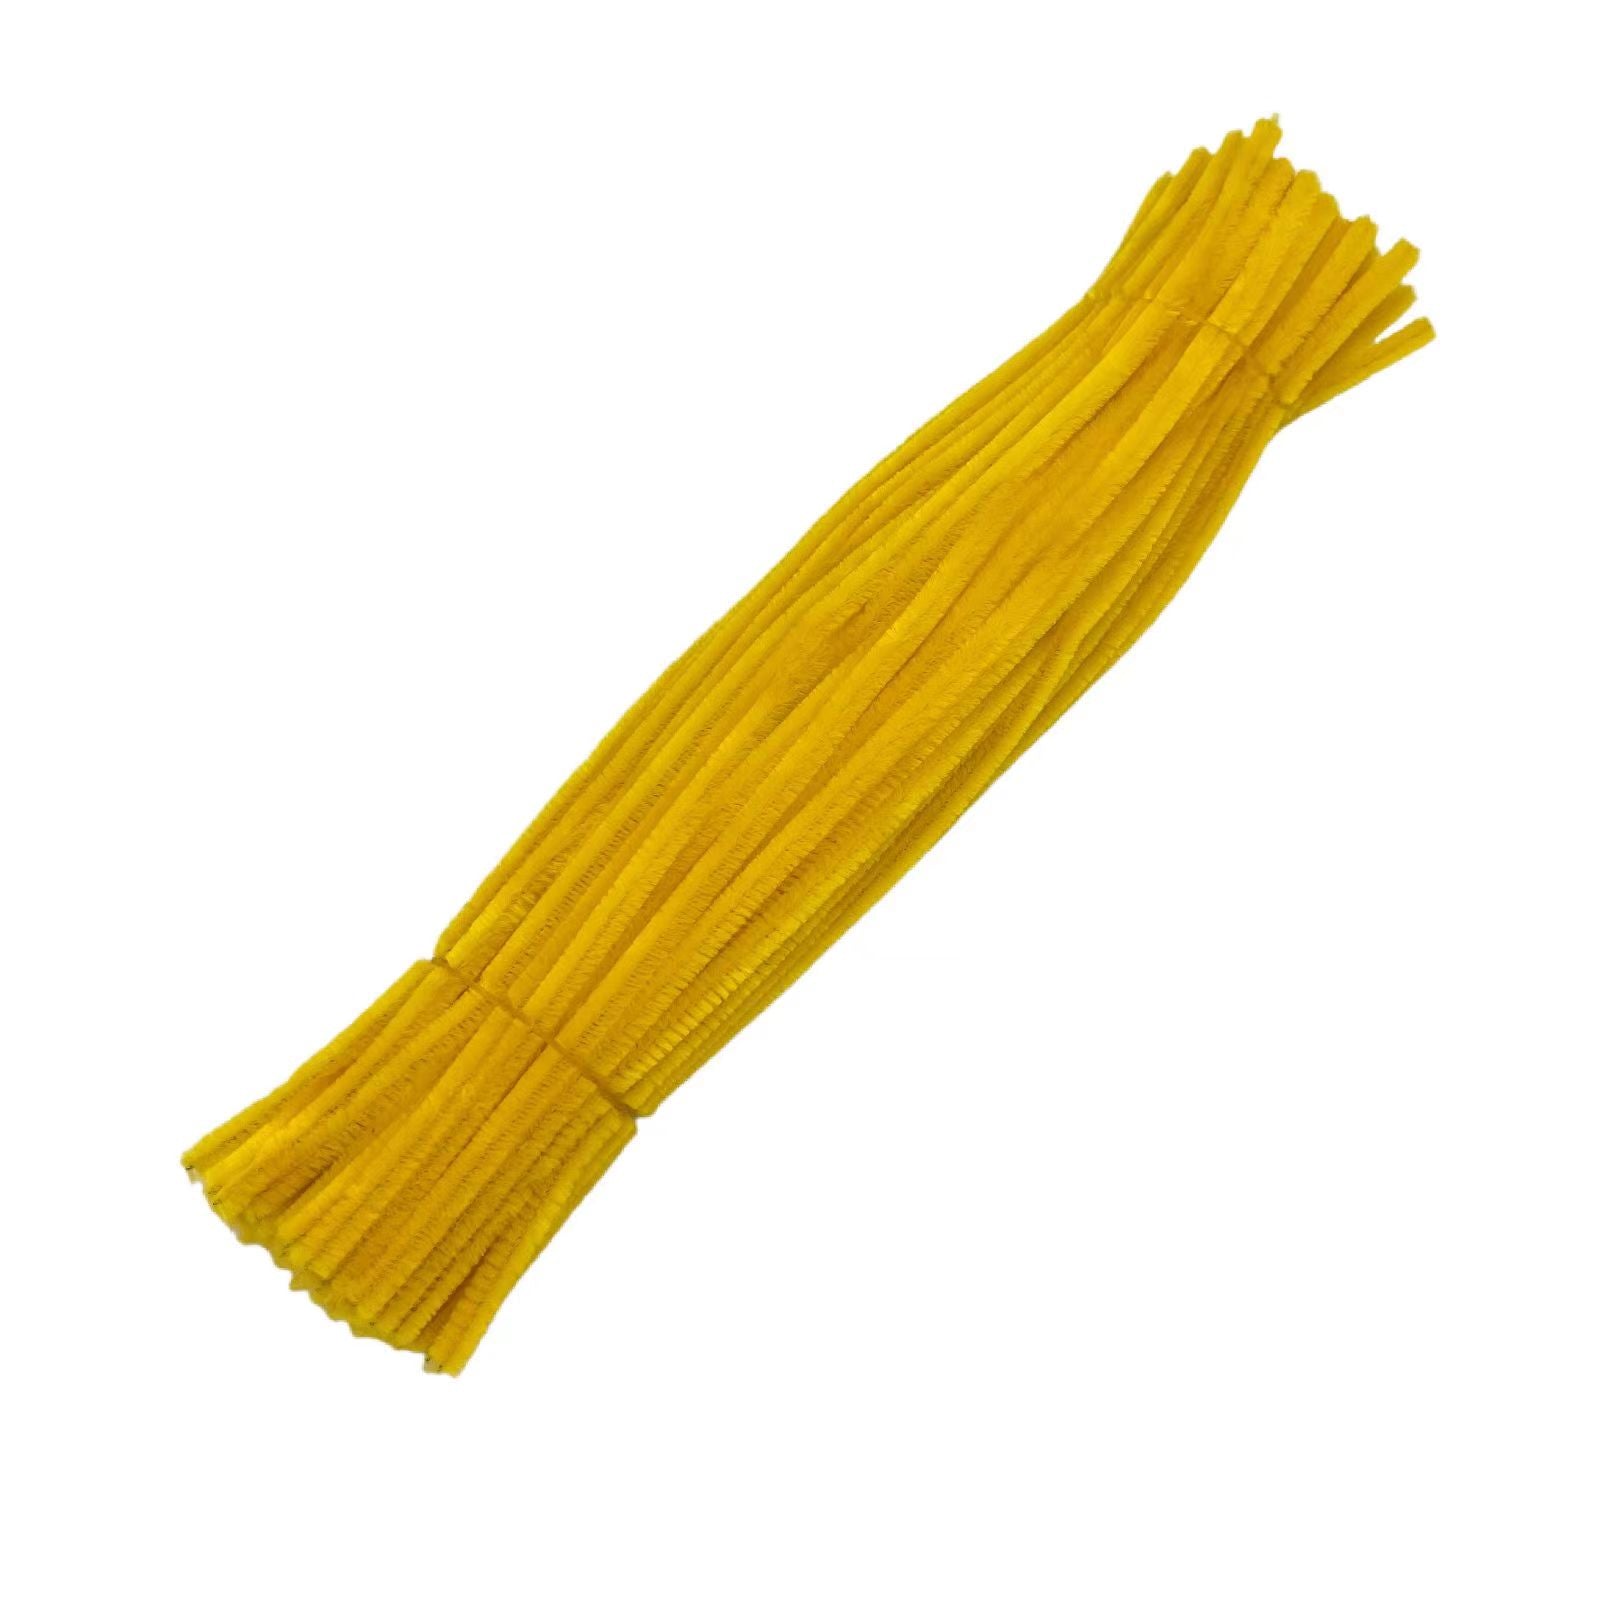 100 Pcs Pipe Cleaners Chenille Stem, Bump and 24 similar items